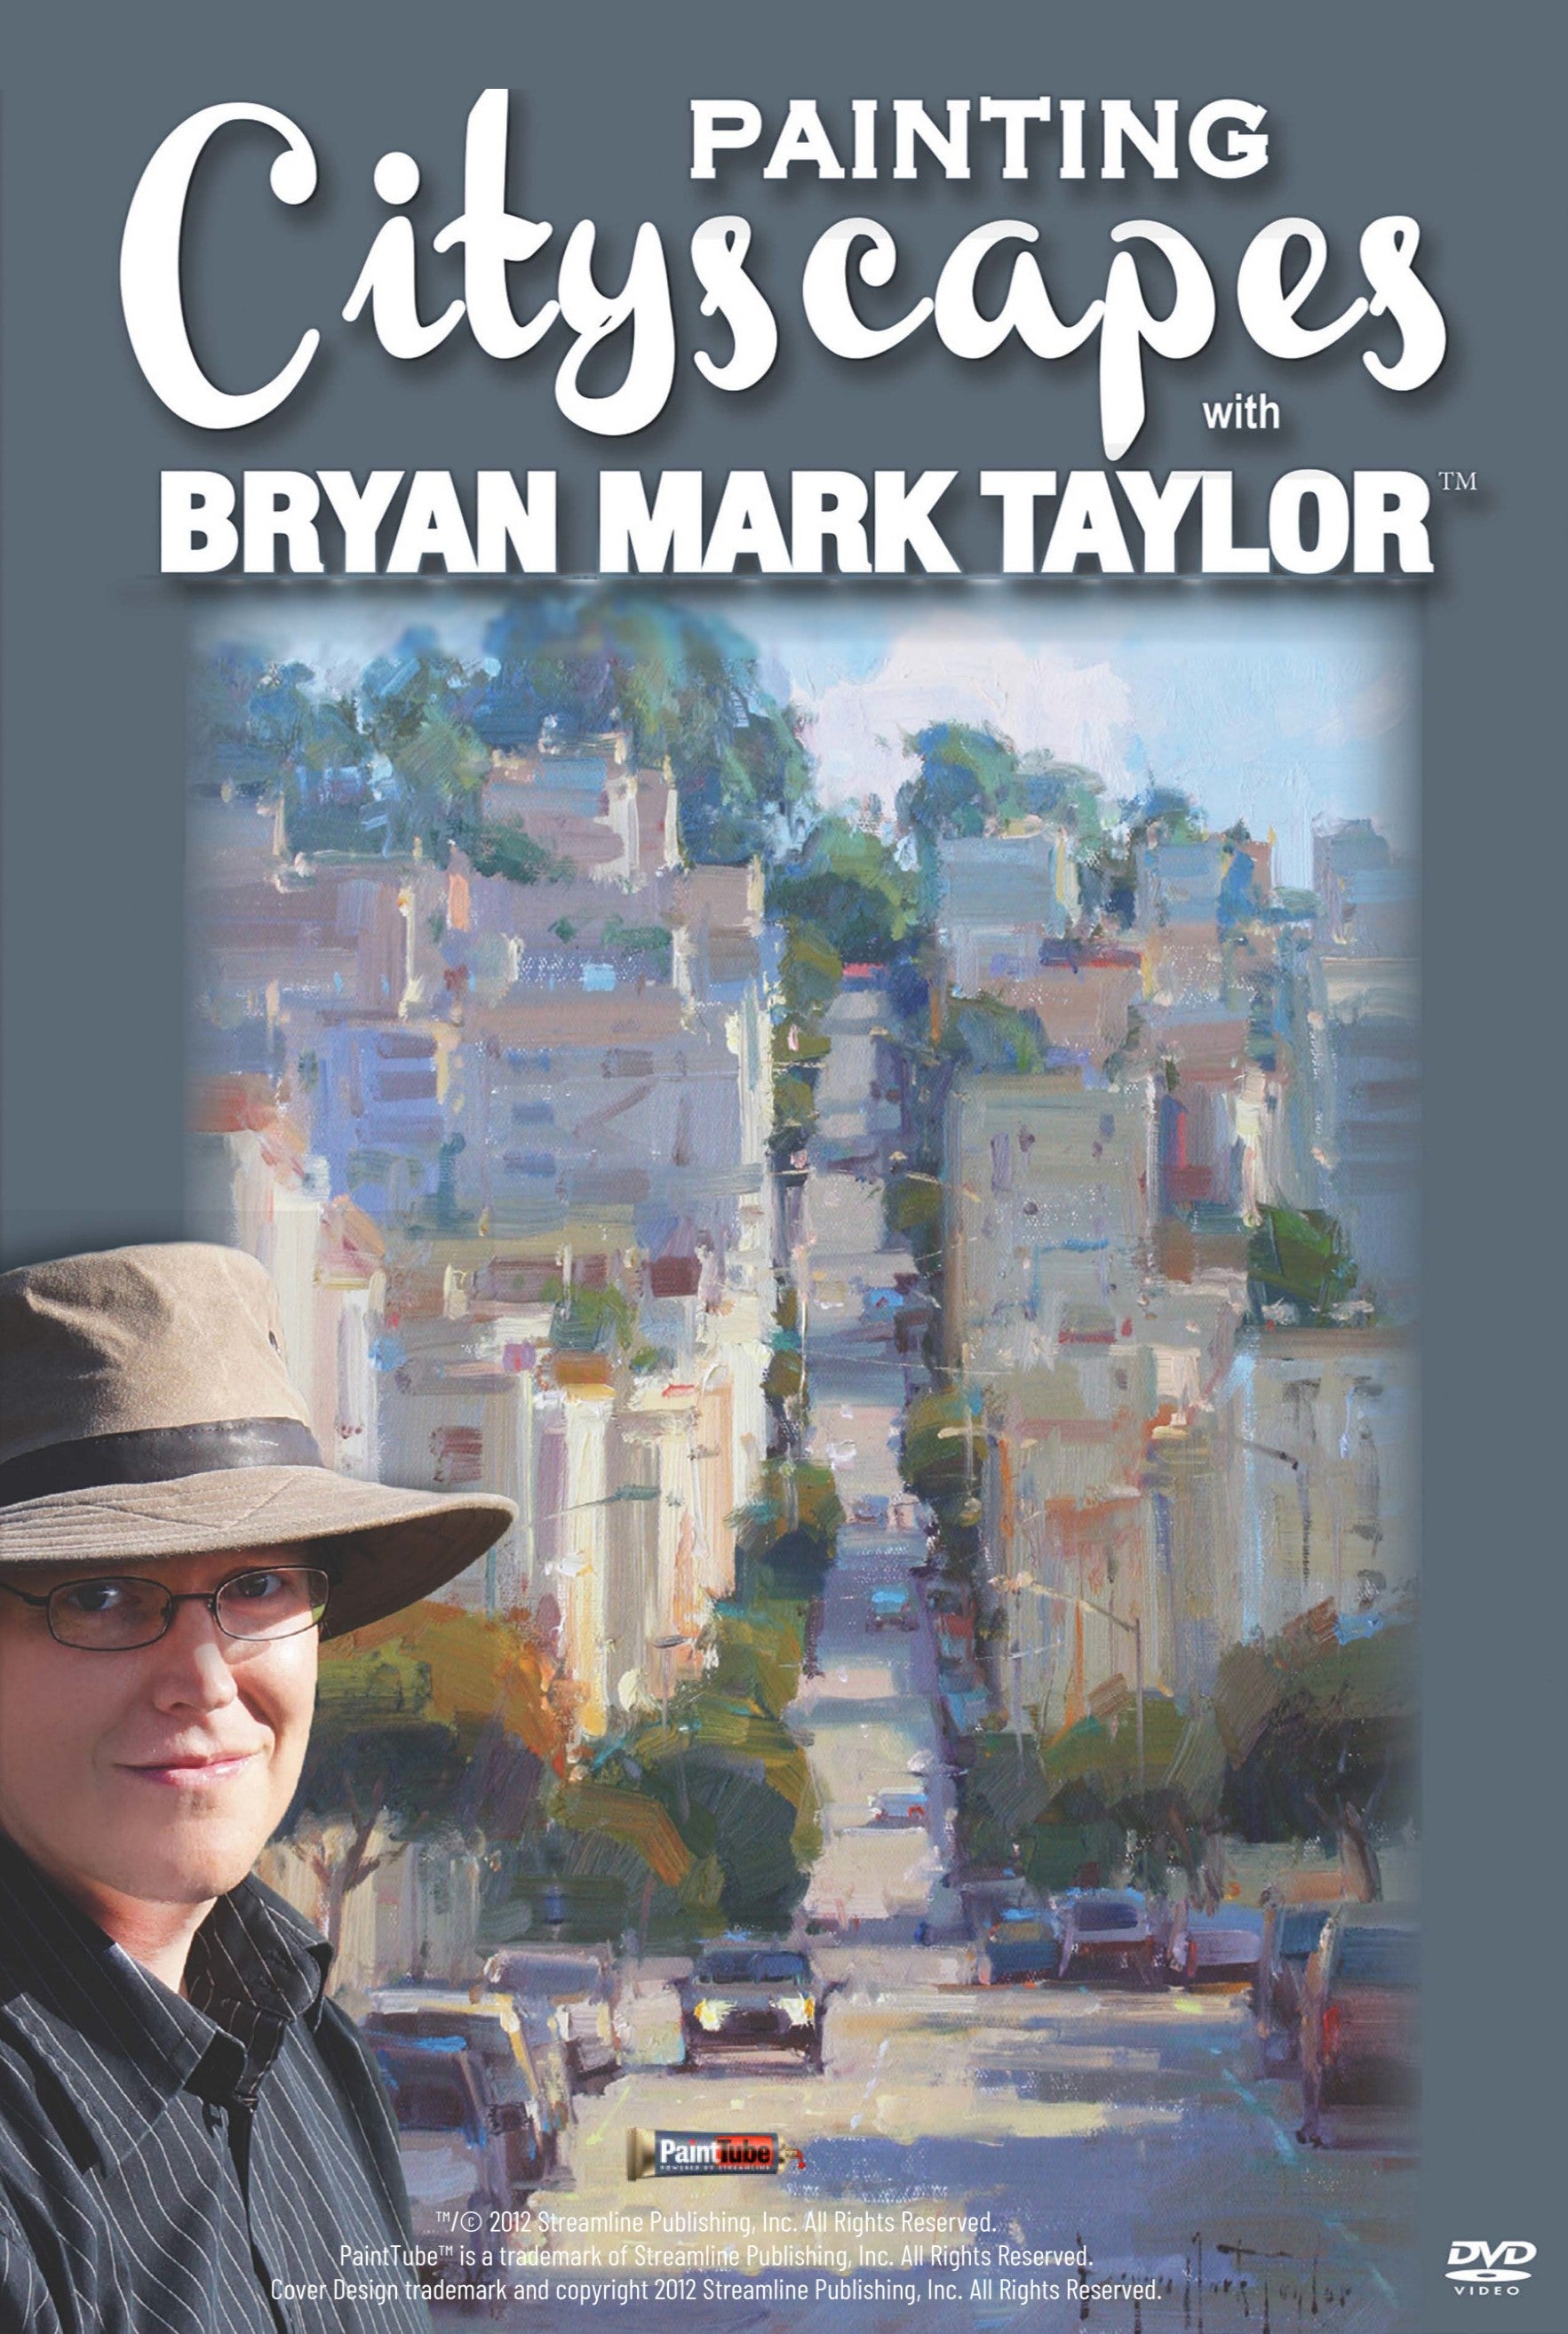 Bryan Mark Taylor: Painting Cityscapes